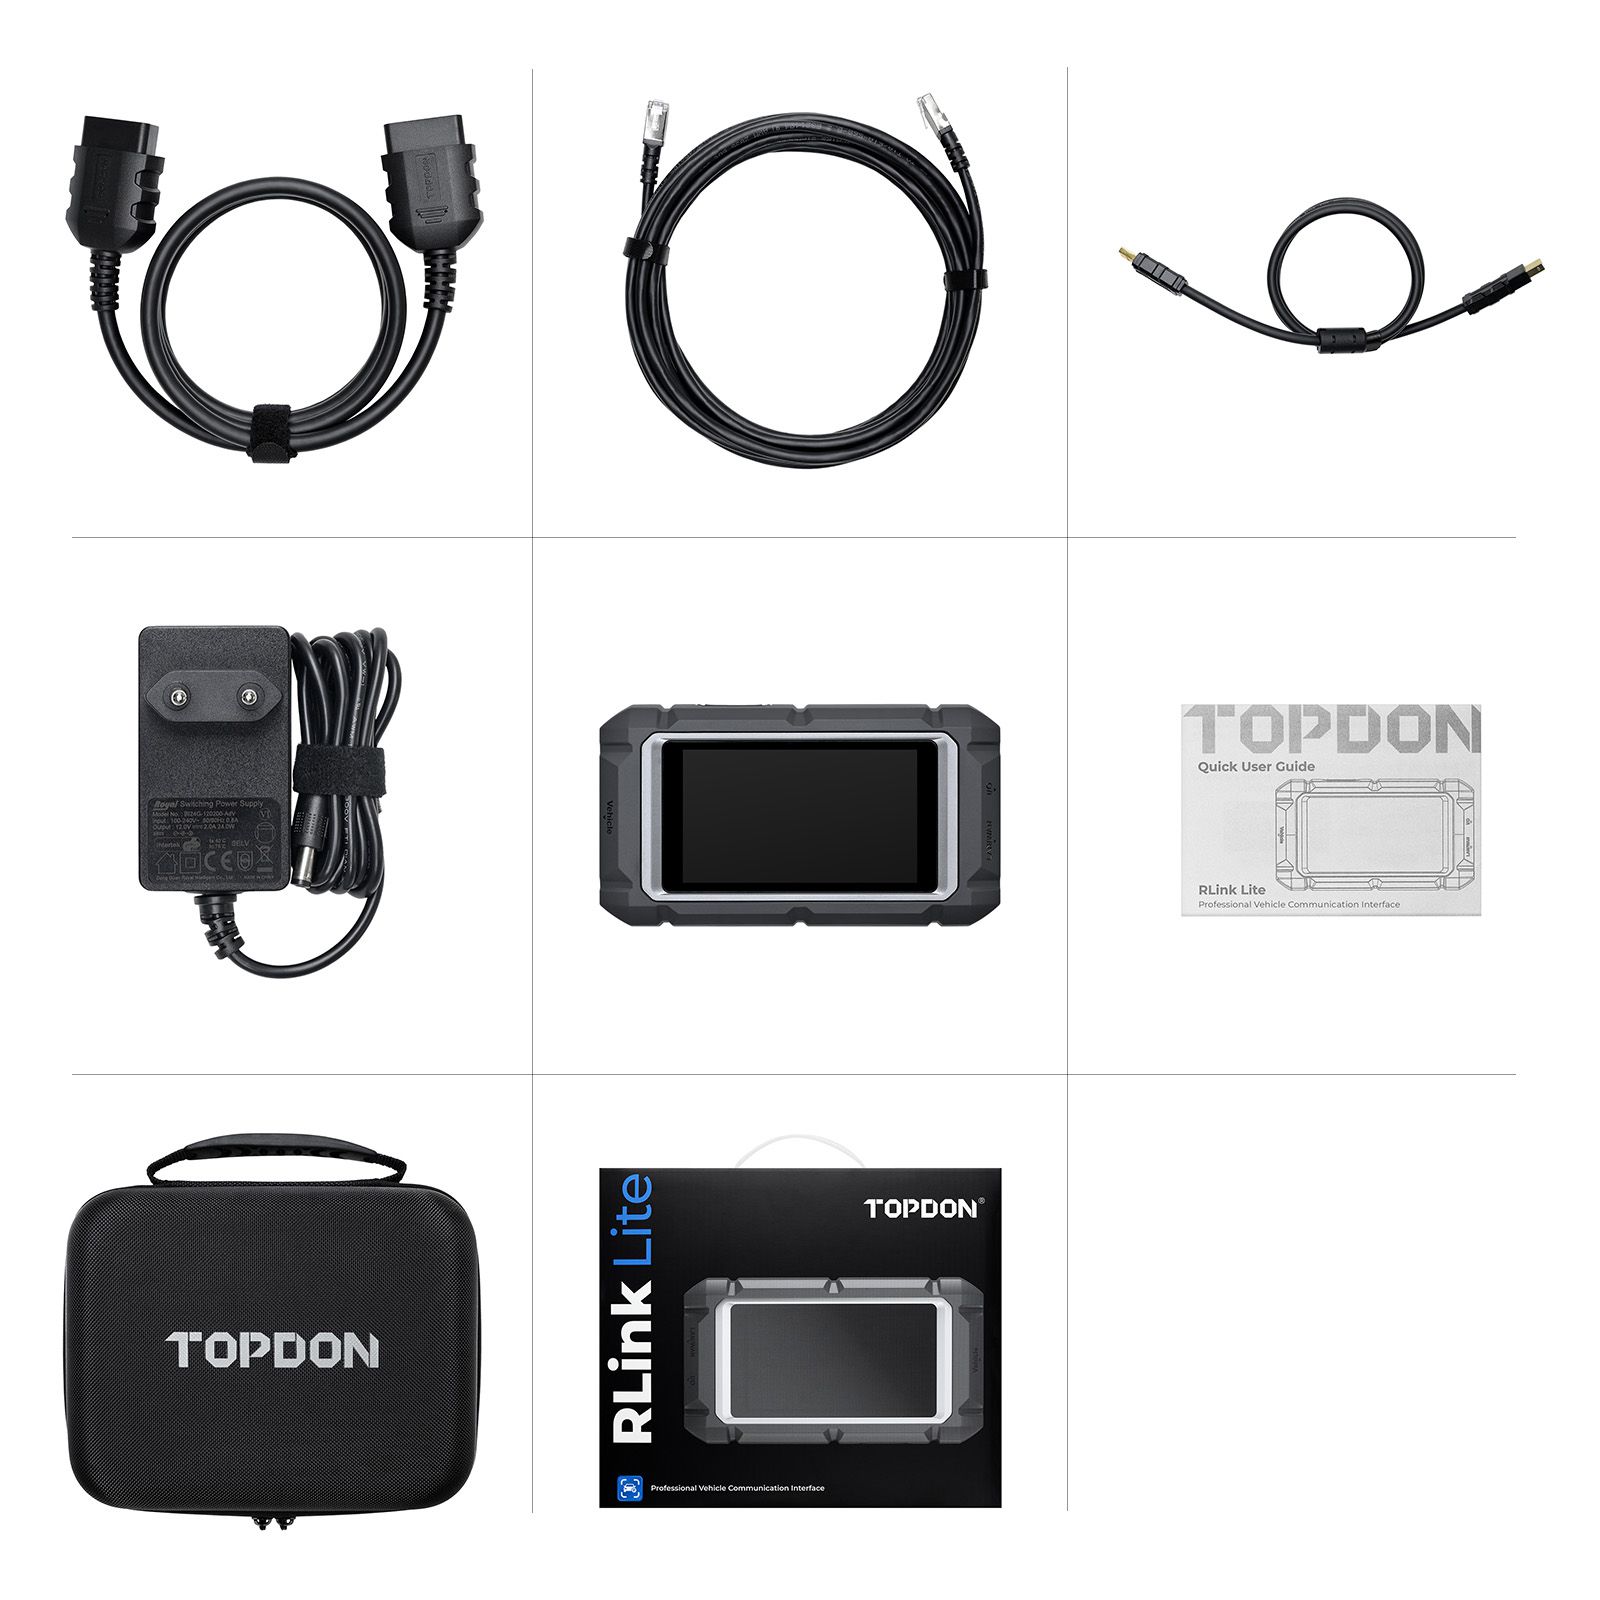 TOPDON RLink Lite 13-in-1 OE-level  Diagnostic Tool Supports Diagnosis Programming Coding and DOIP CANFD Protocols For 13 Car Brands